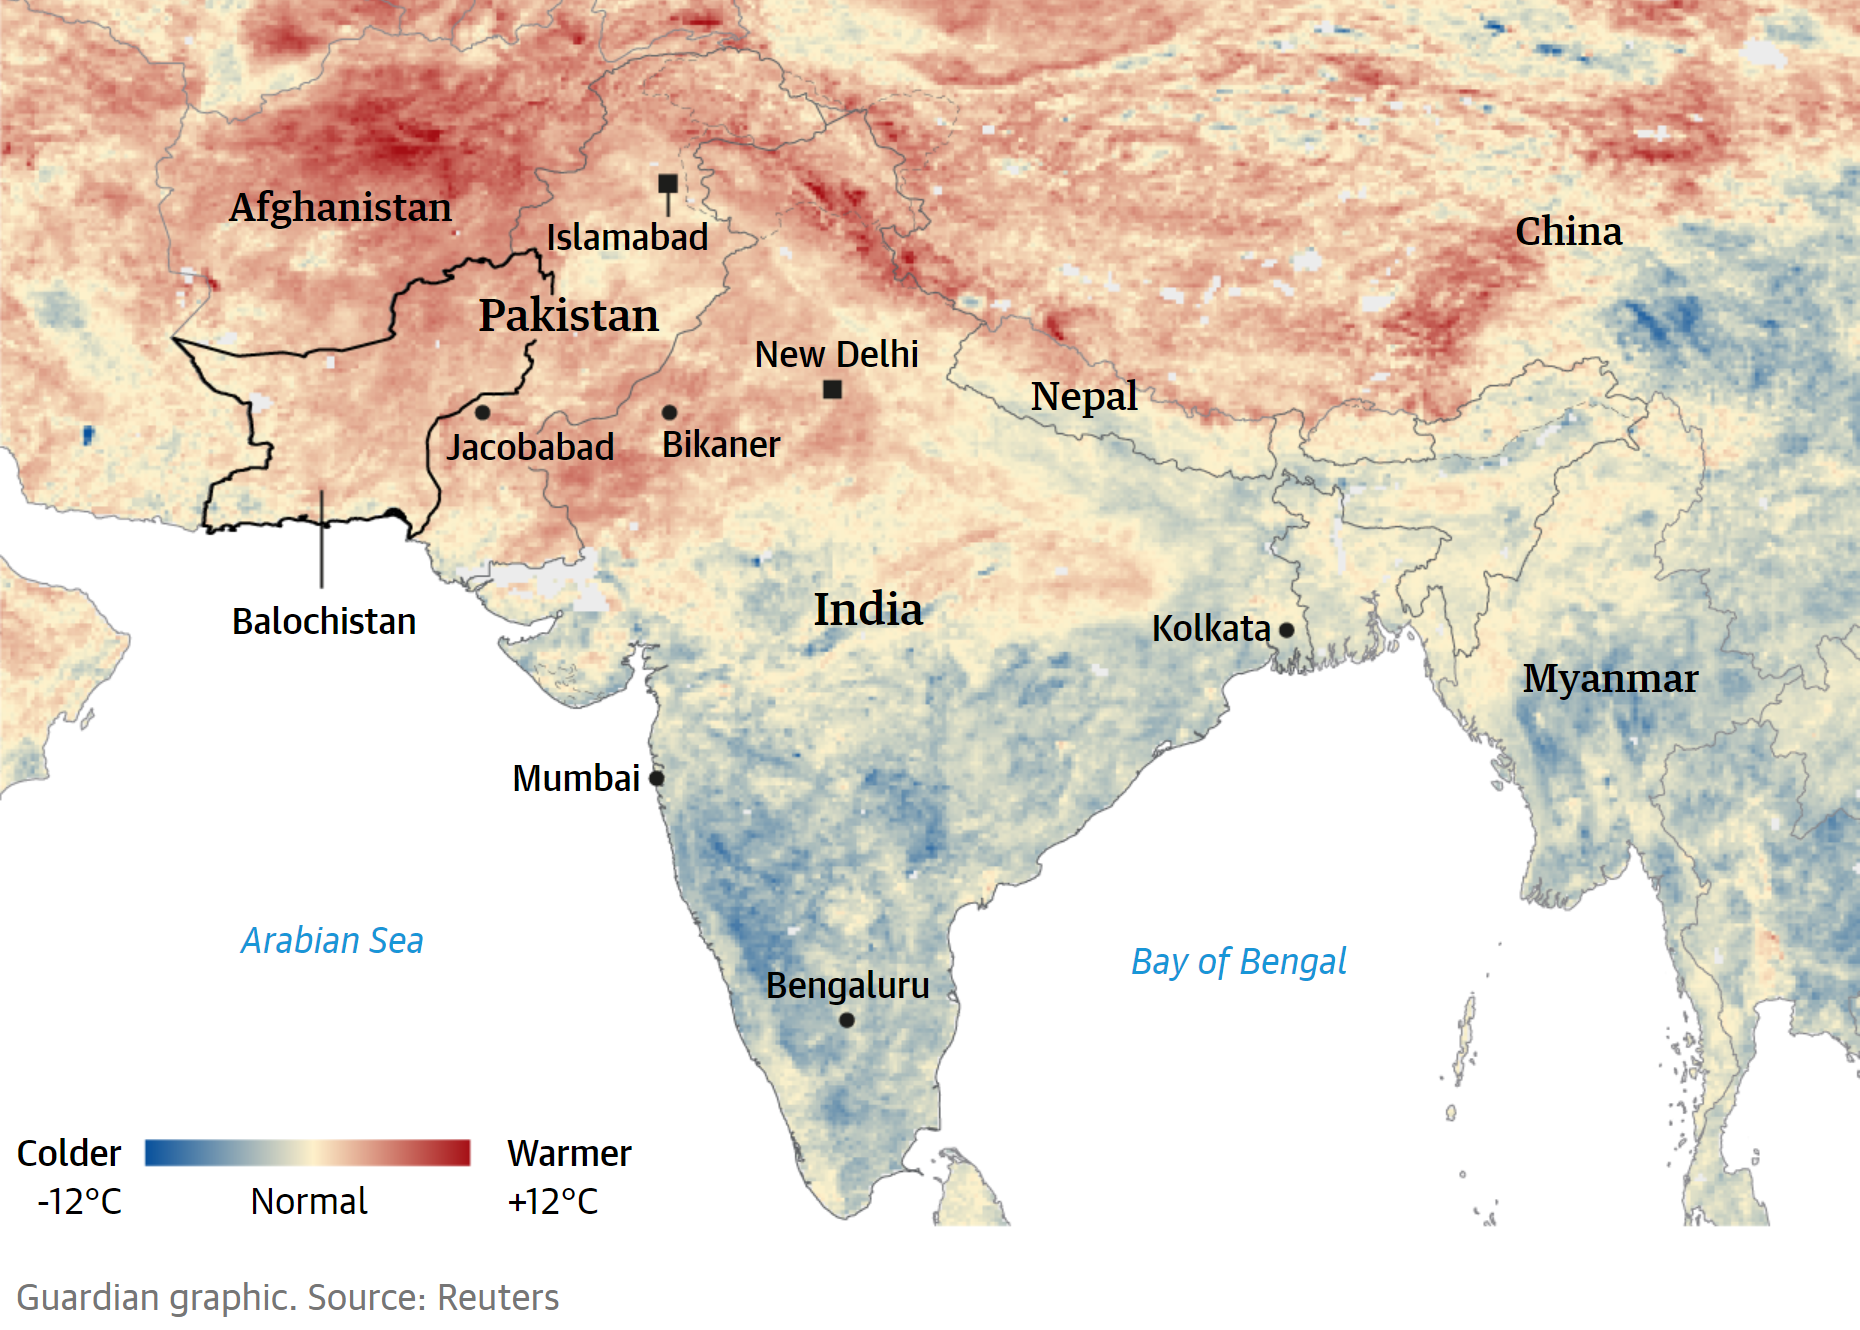 Land surface temperatures in April 2022 compared with averages for April between 2001 and 2010. In April 2022, parts of India and Pakistan recorded their highest average temperatures on record. Source: Reuters. Graphic: The Guardian